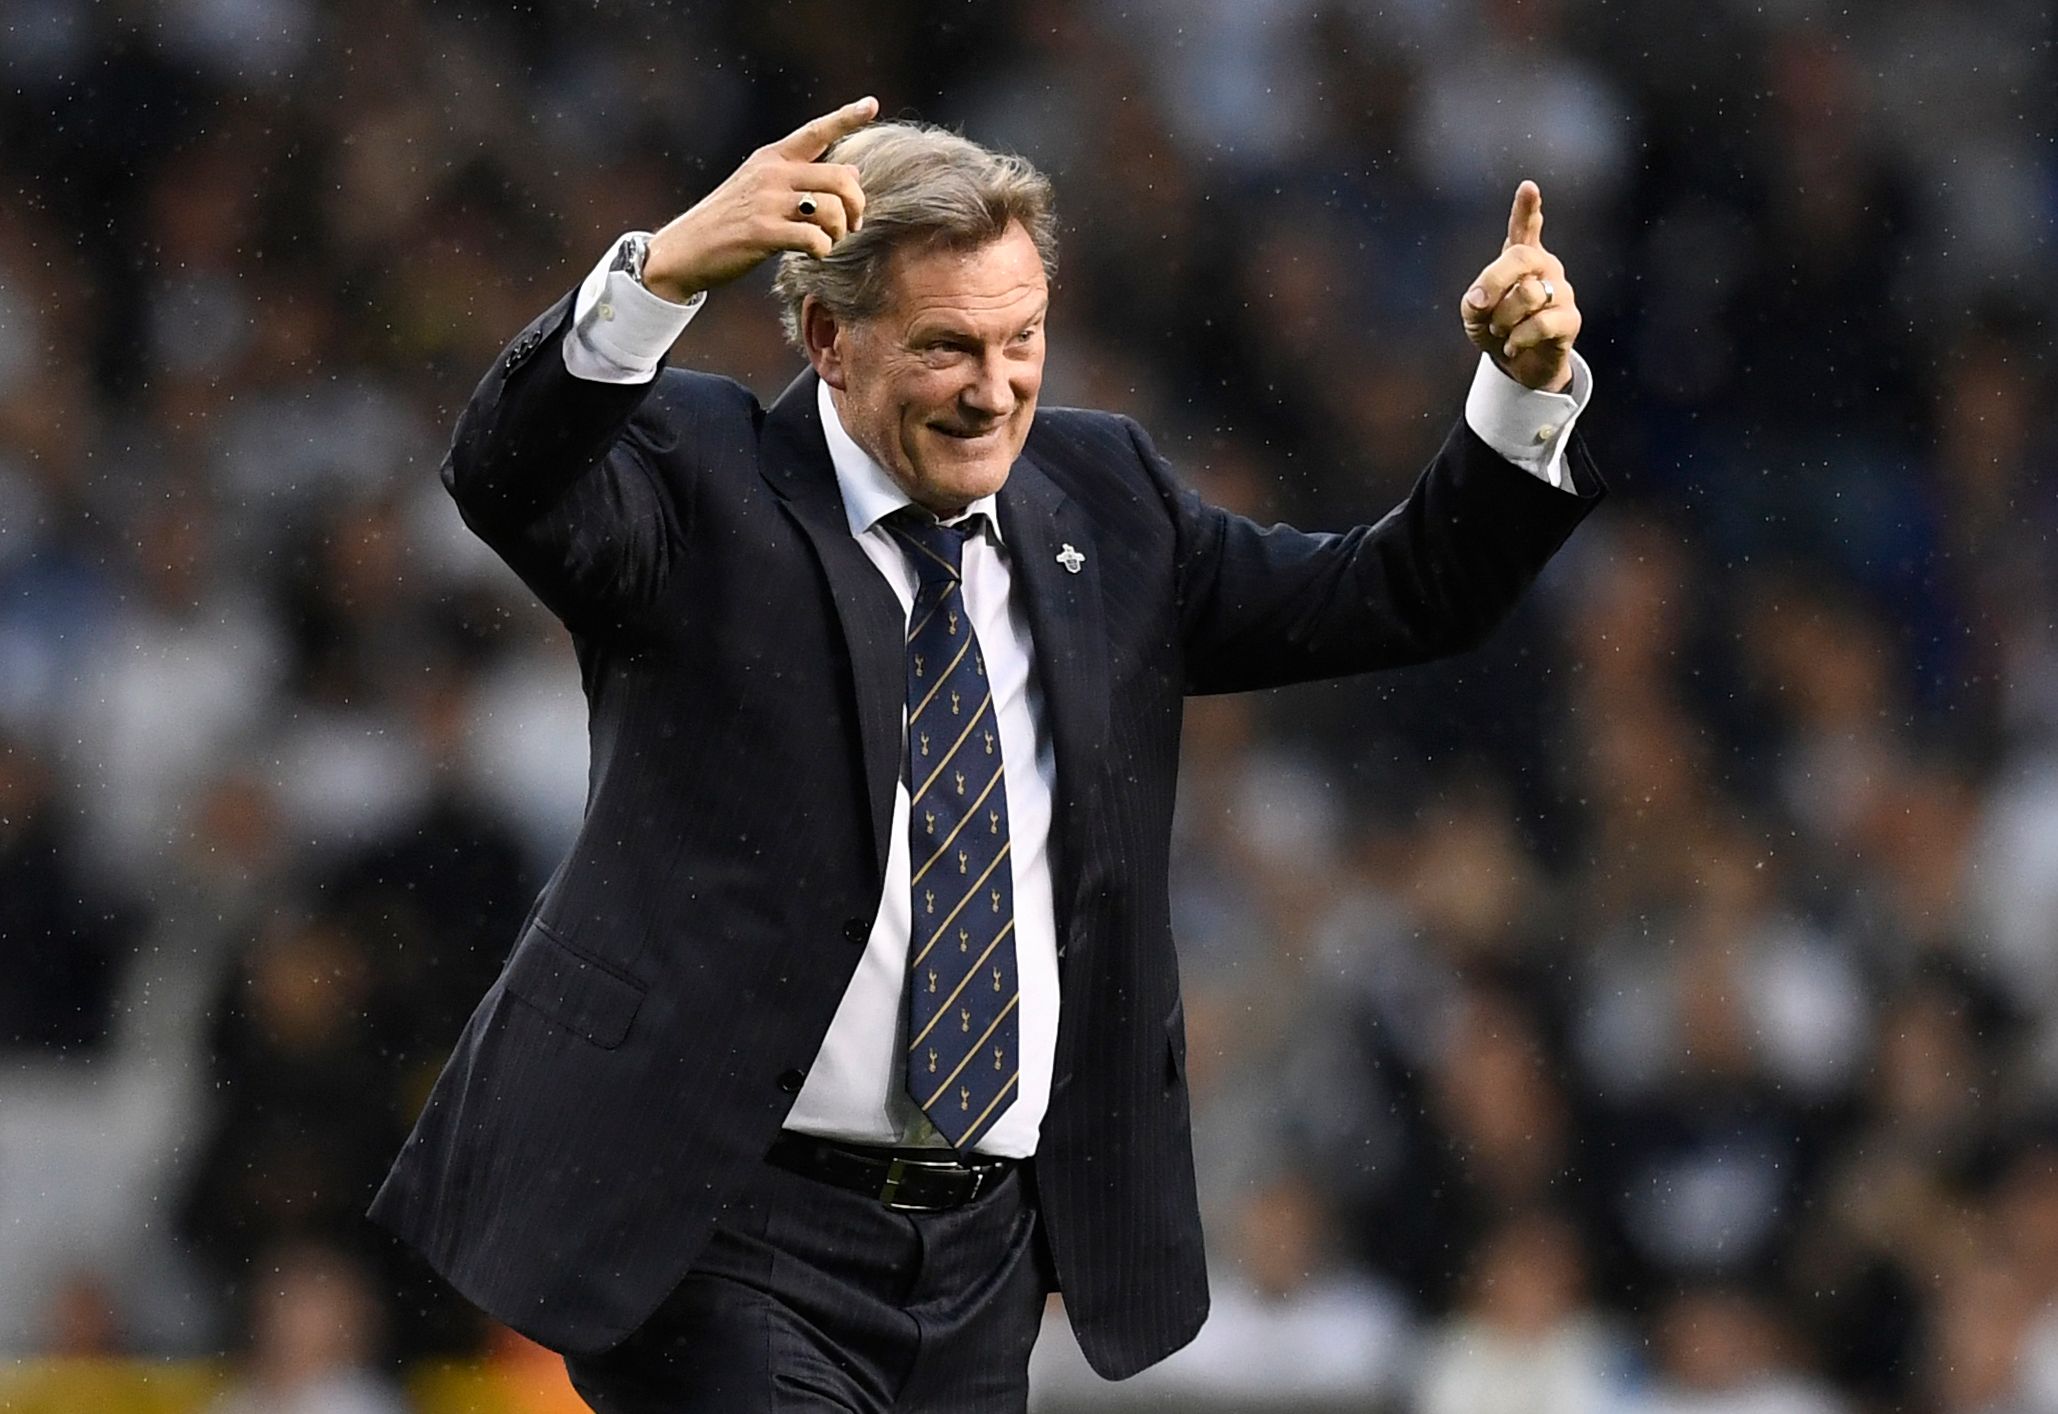 Britain Soccer Football - Tottenham Hotspur v Manchester United - Premier League - White Hart Lane - 14/5/17 Former Tottenham player and manager Glenn Hoddle during the ceremony after the game Reuters / Dylan Martinez Livepic EDITORIAL USE ONLY. No use with unauthorized audio, video, data, fixture lists, club/league logos or 